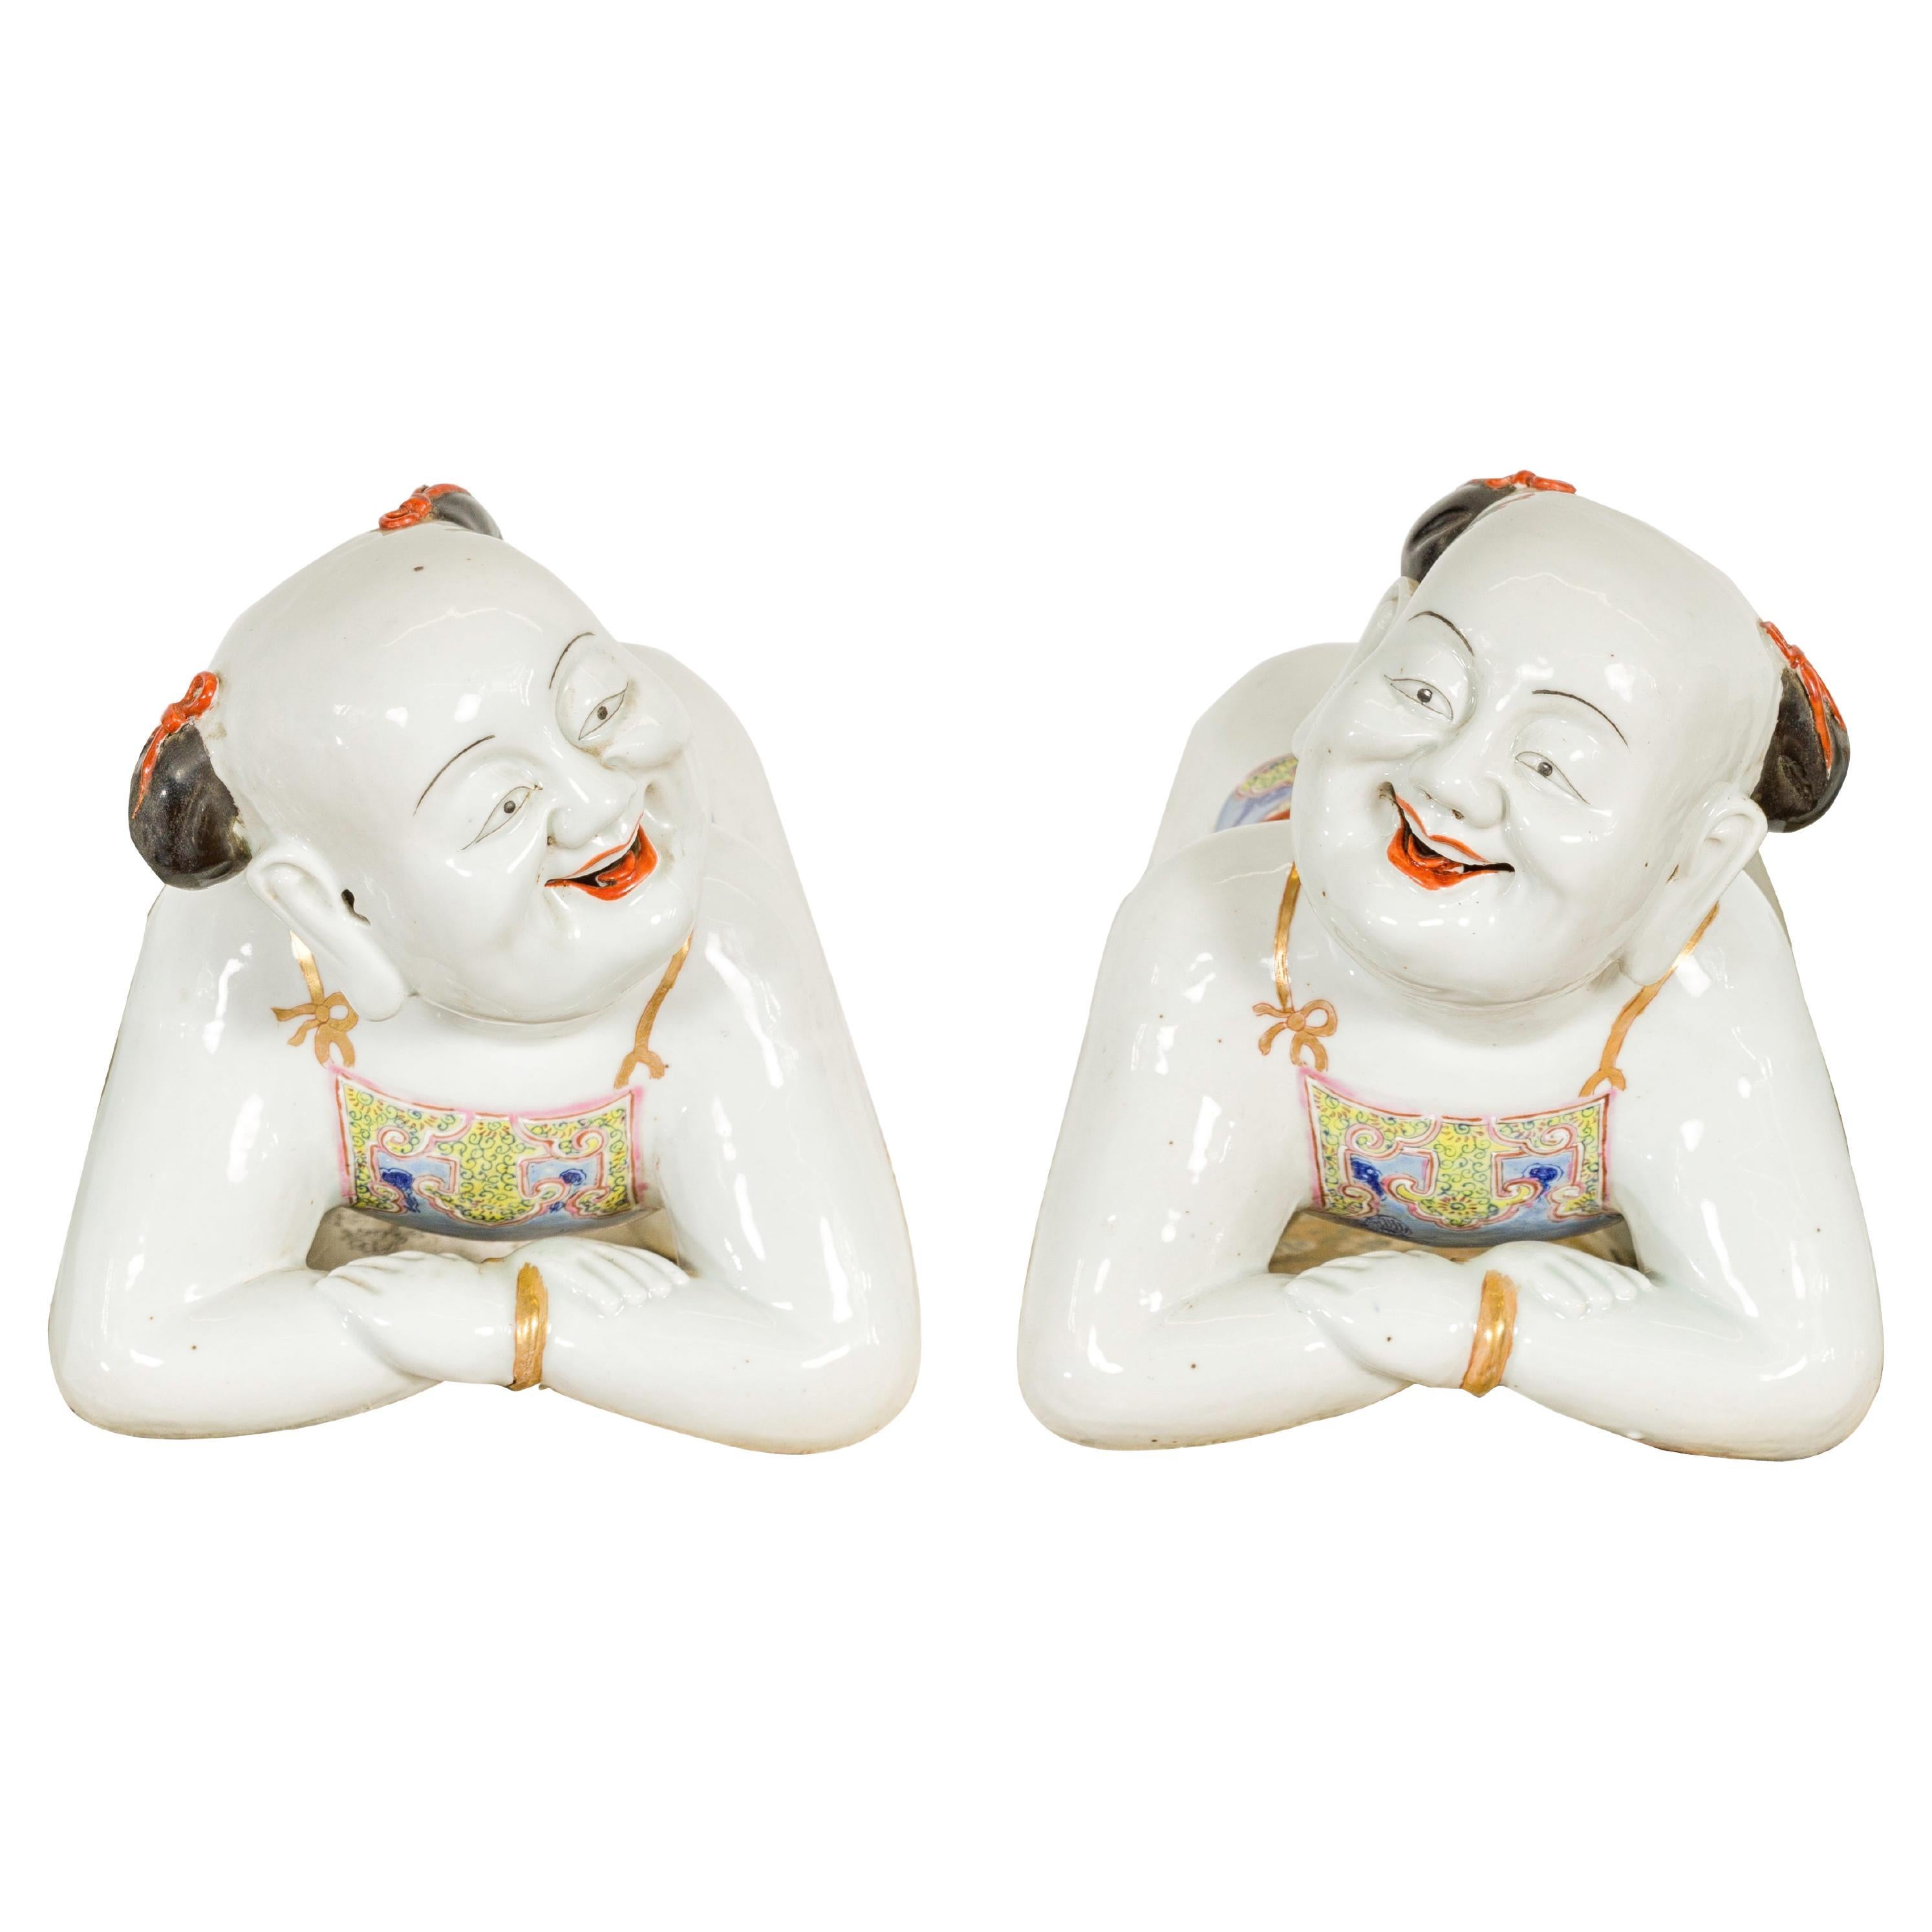 Pair of Qing Dynasty Period Porcelain Tong'zi Pillows Depicting Kneeling Boys For Sale